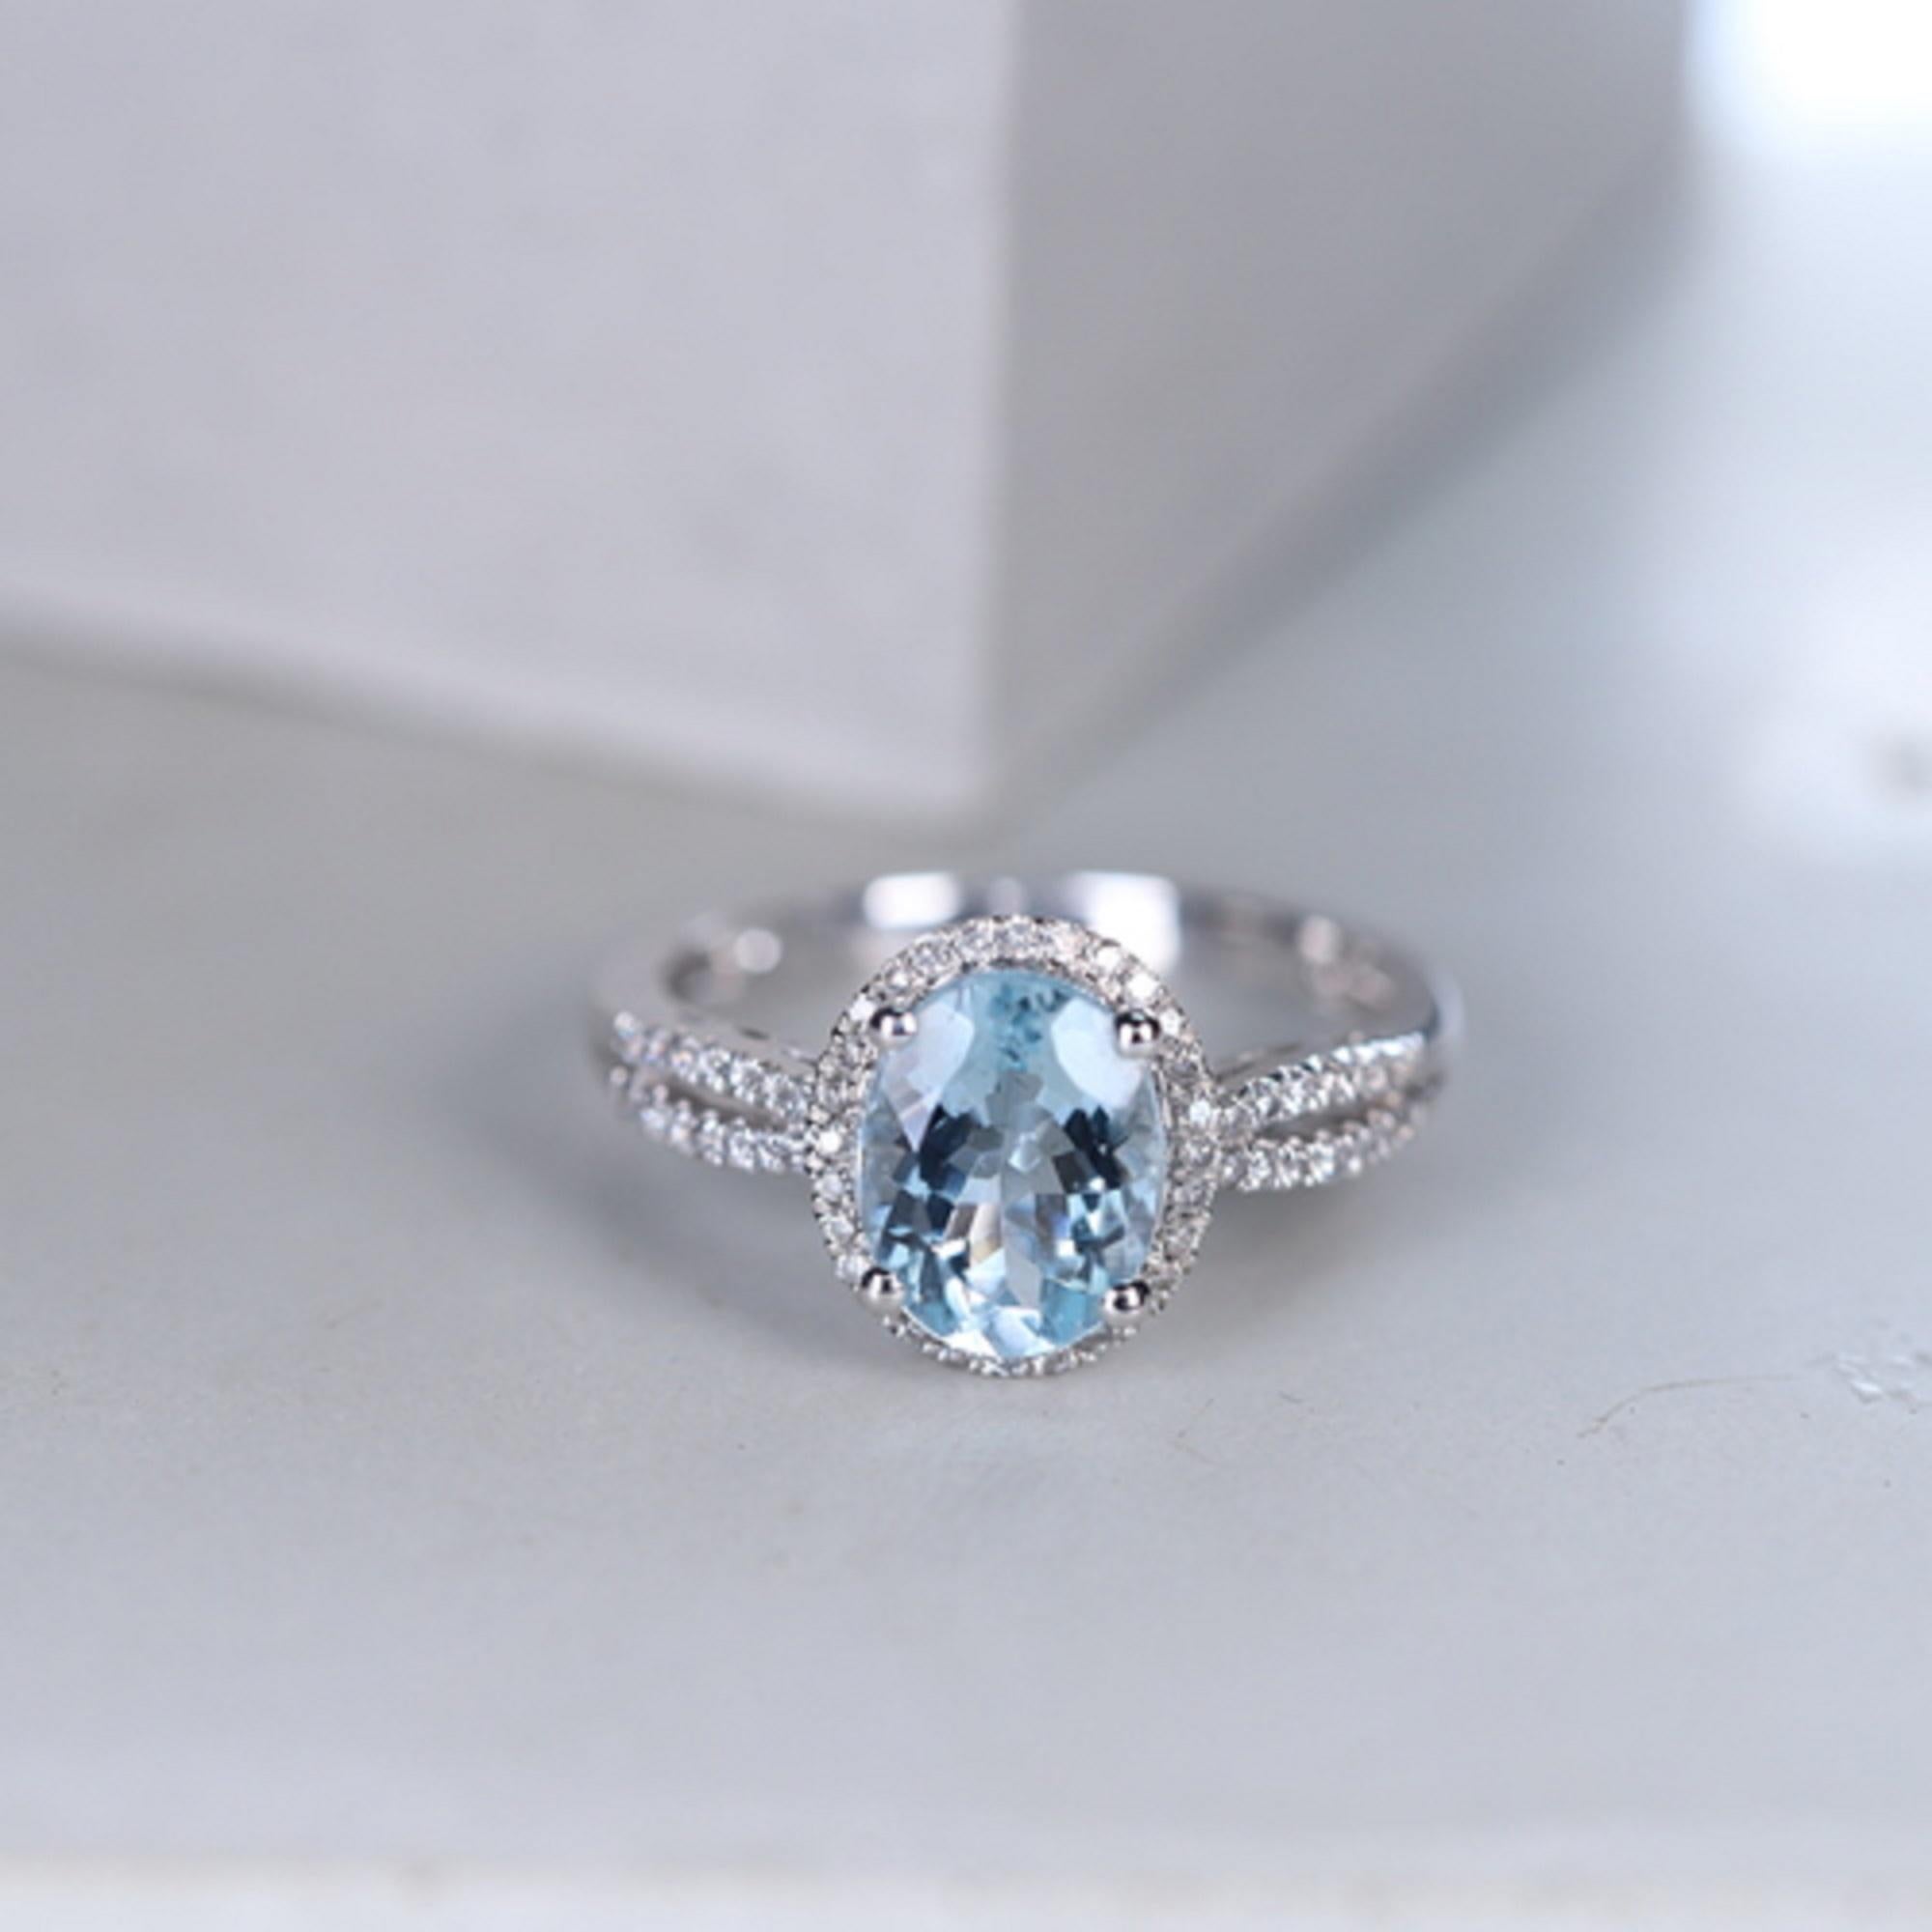 Stunning, timeless and classy eternity Unique Ring. Decorate yourself in luxury with this Gin & Grace Ring. The 14k White Gold jewelry boasts Oval cut Prong Setting Genuine Aquamarine (1 pcs) 1.65 Carat, along with Natural Round cut white Diamond